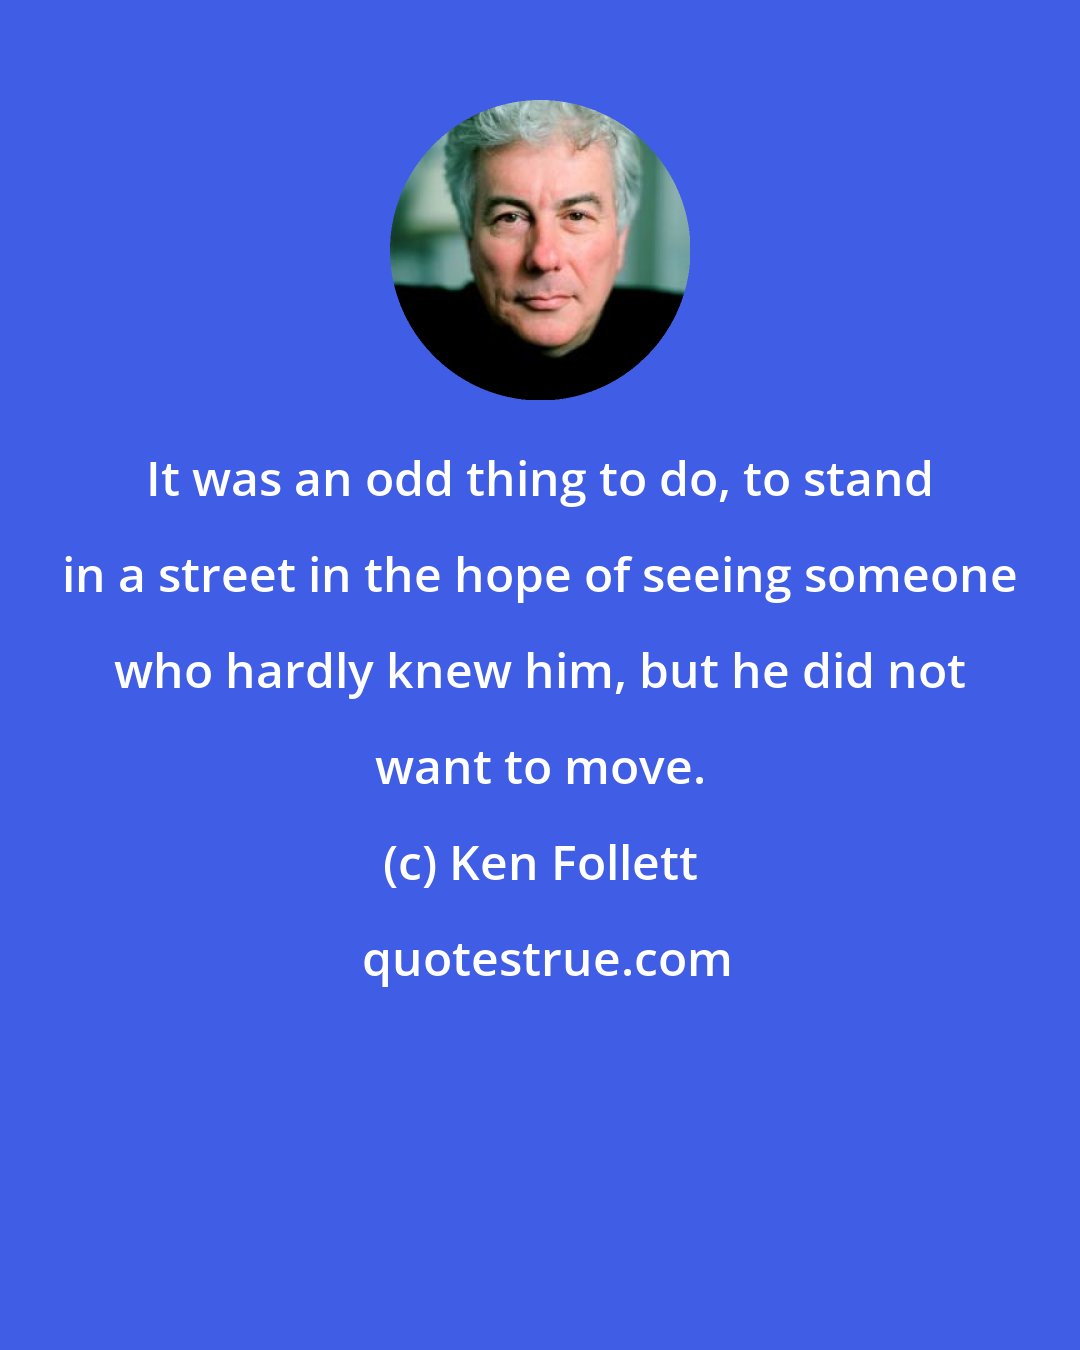 Ken Follett: It was an odd thing to do, to stand in a street in the hope of seeing someone who hardly knew him, but he did not want to move.